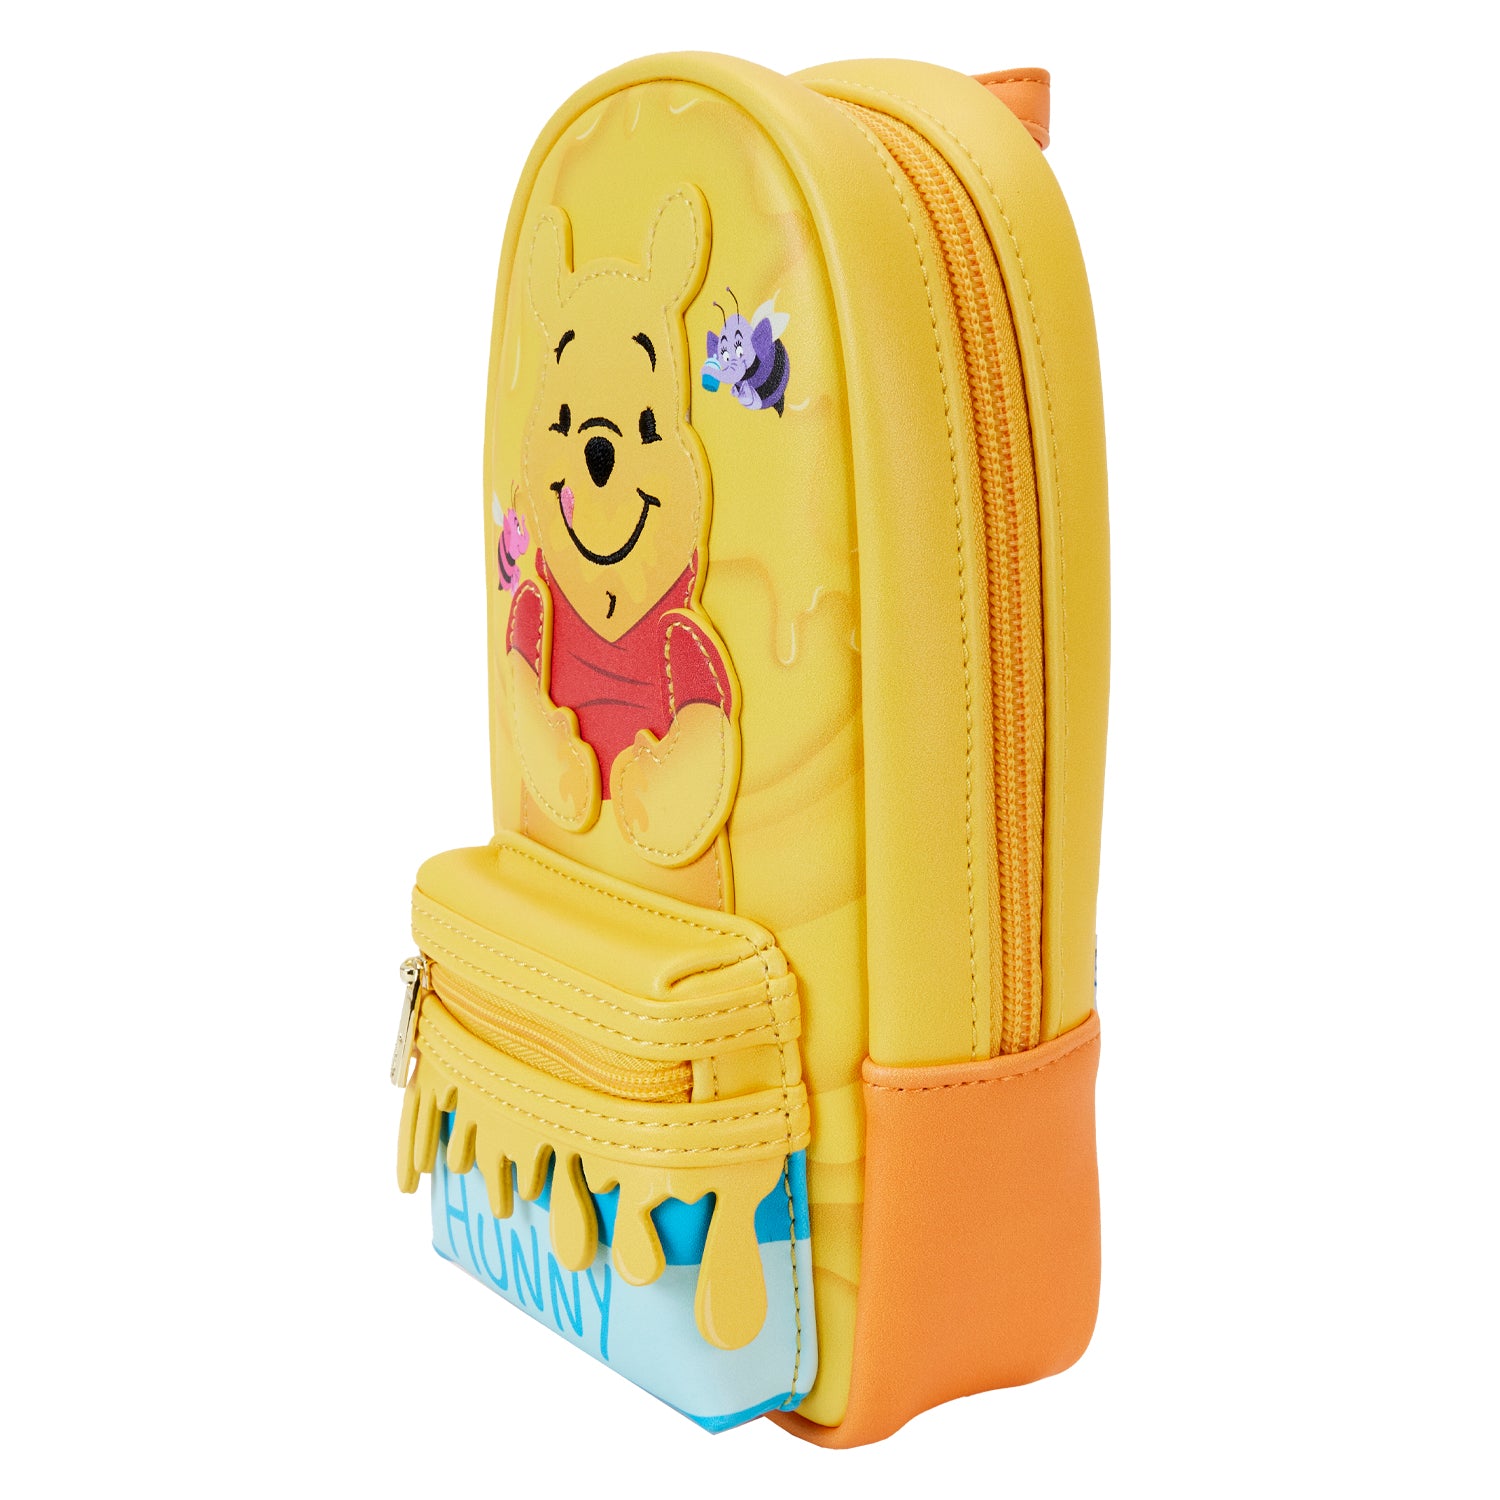 Loungefly Disney Winnie the Pooh Mini Backpack Pencil Case